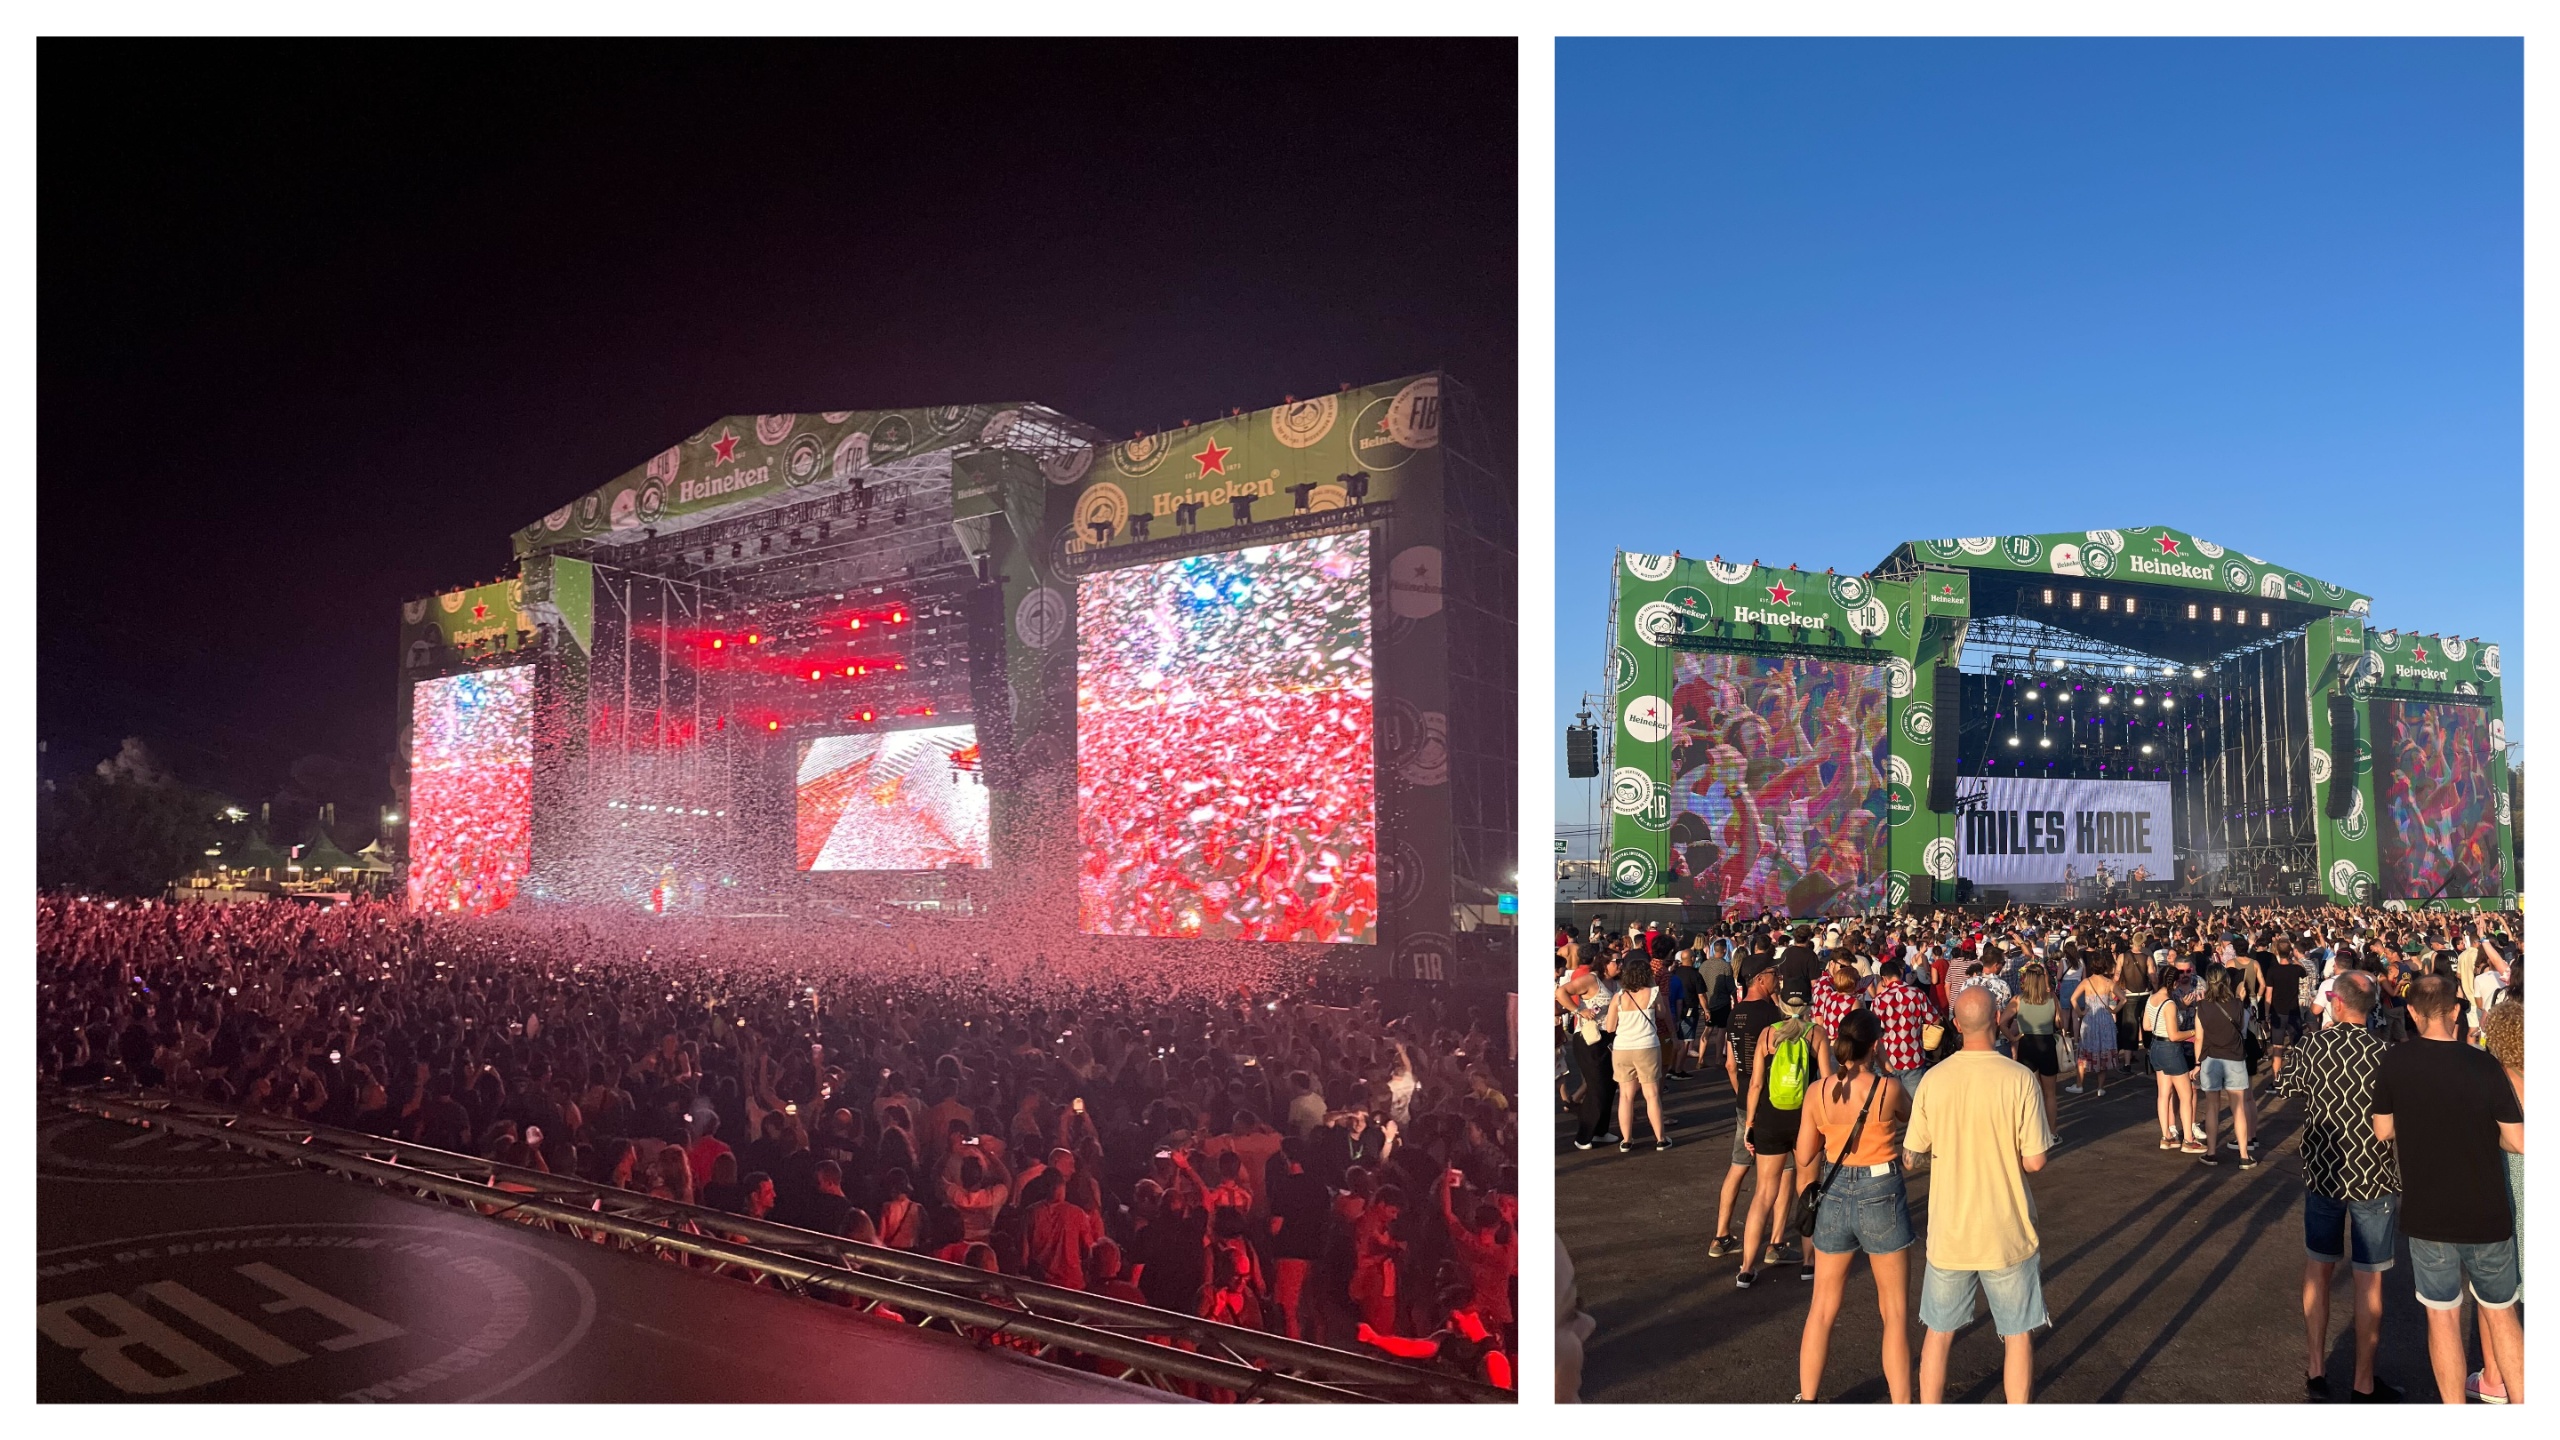 Benicassim review: Spain’s legendary music festival may have lost its former glory – but it still offers a magical three days